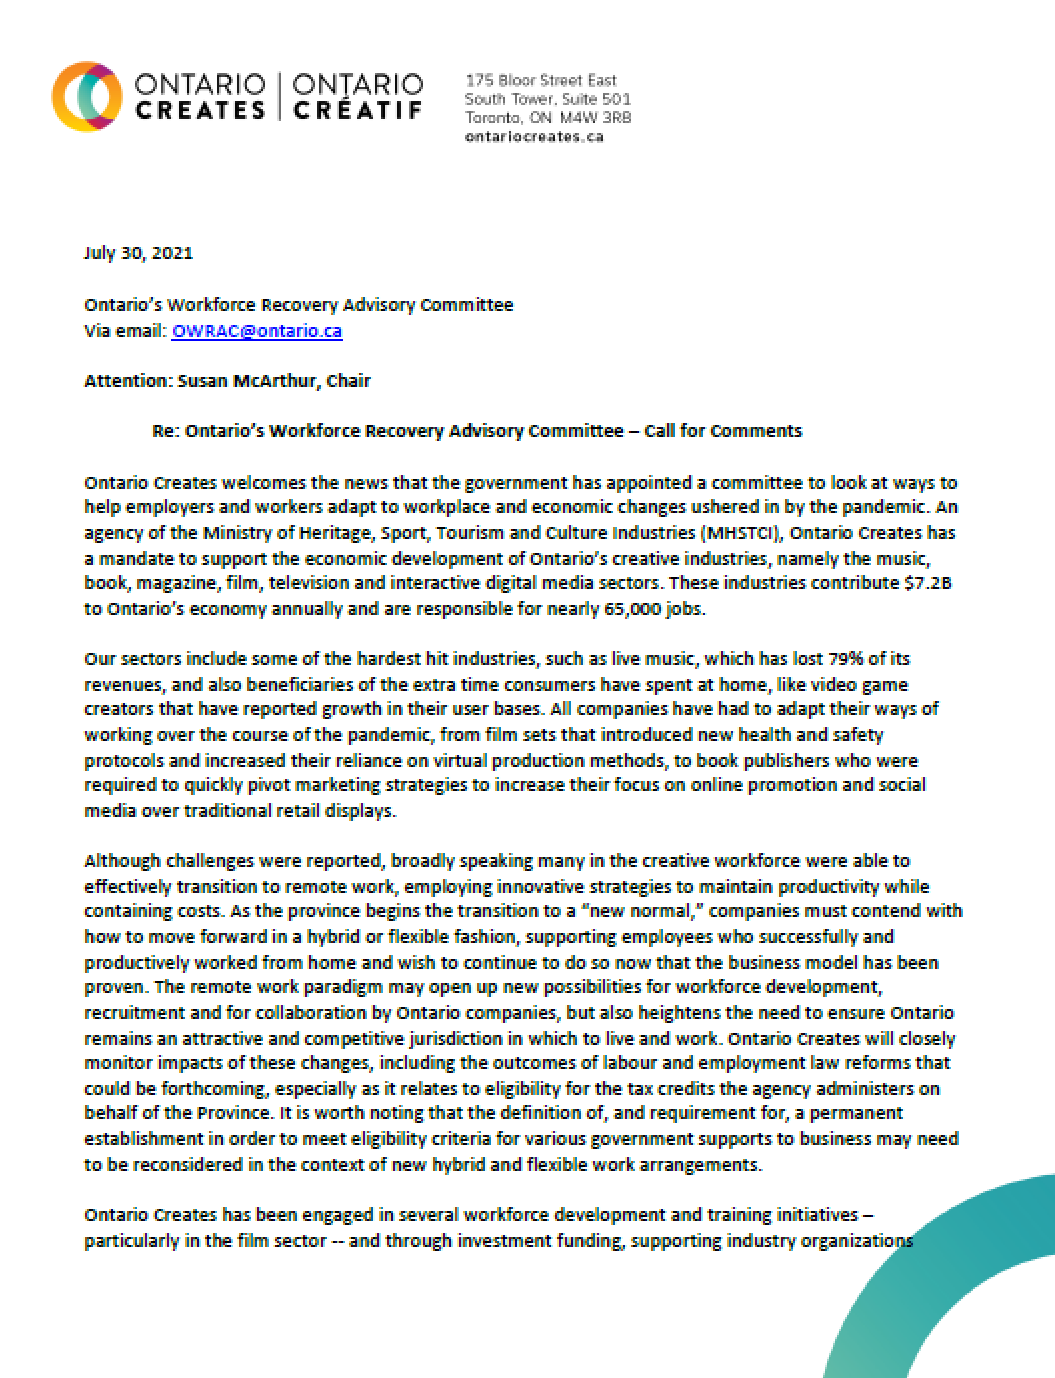 Submission in response to Ontario's Workforce Recovery Advisory Committee